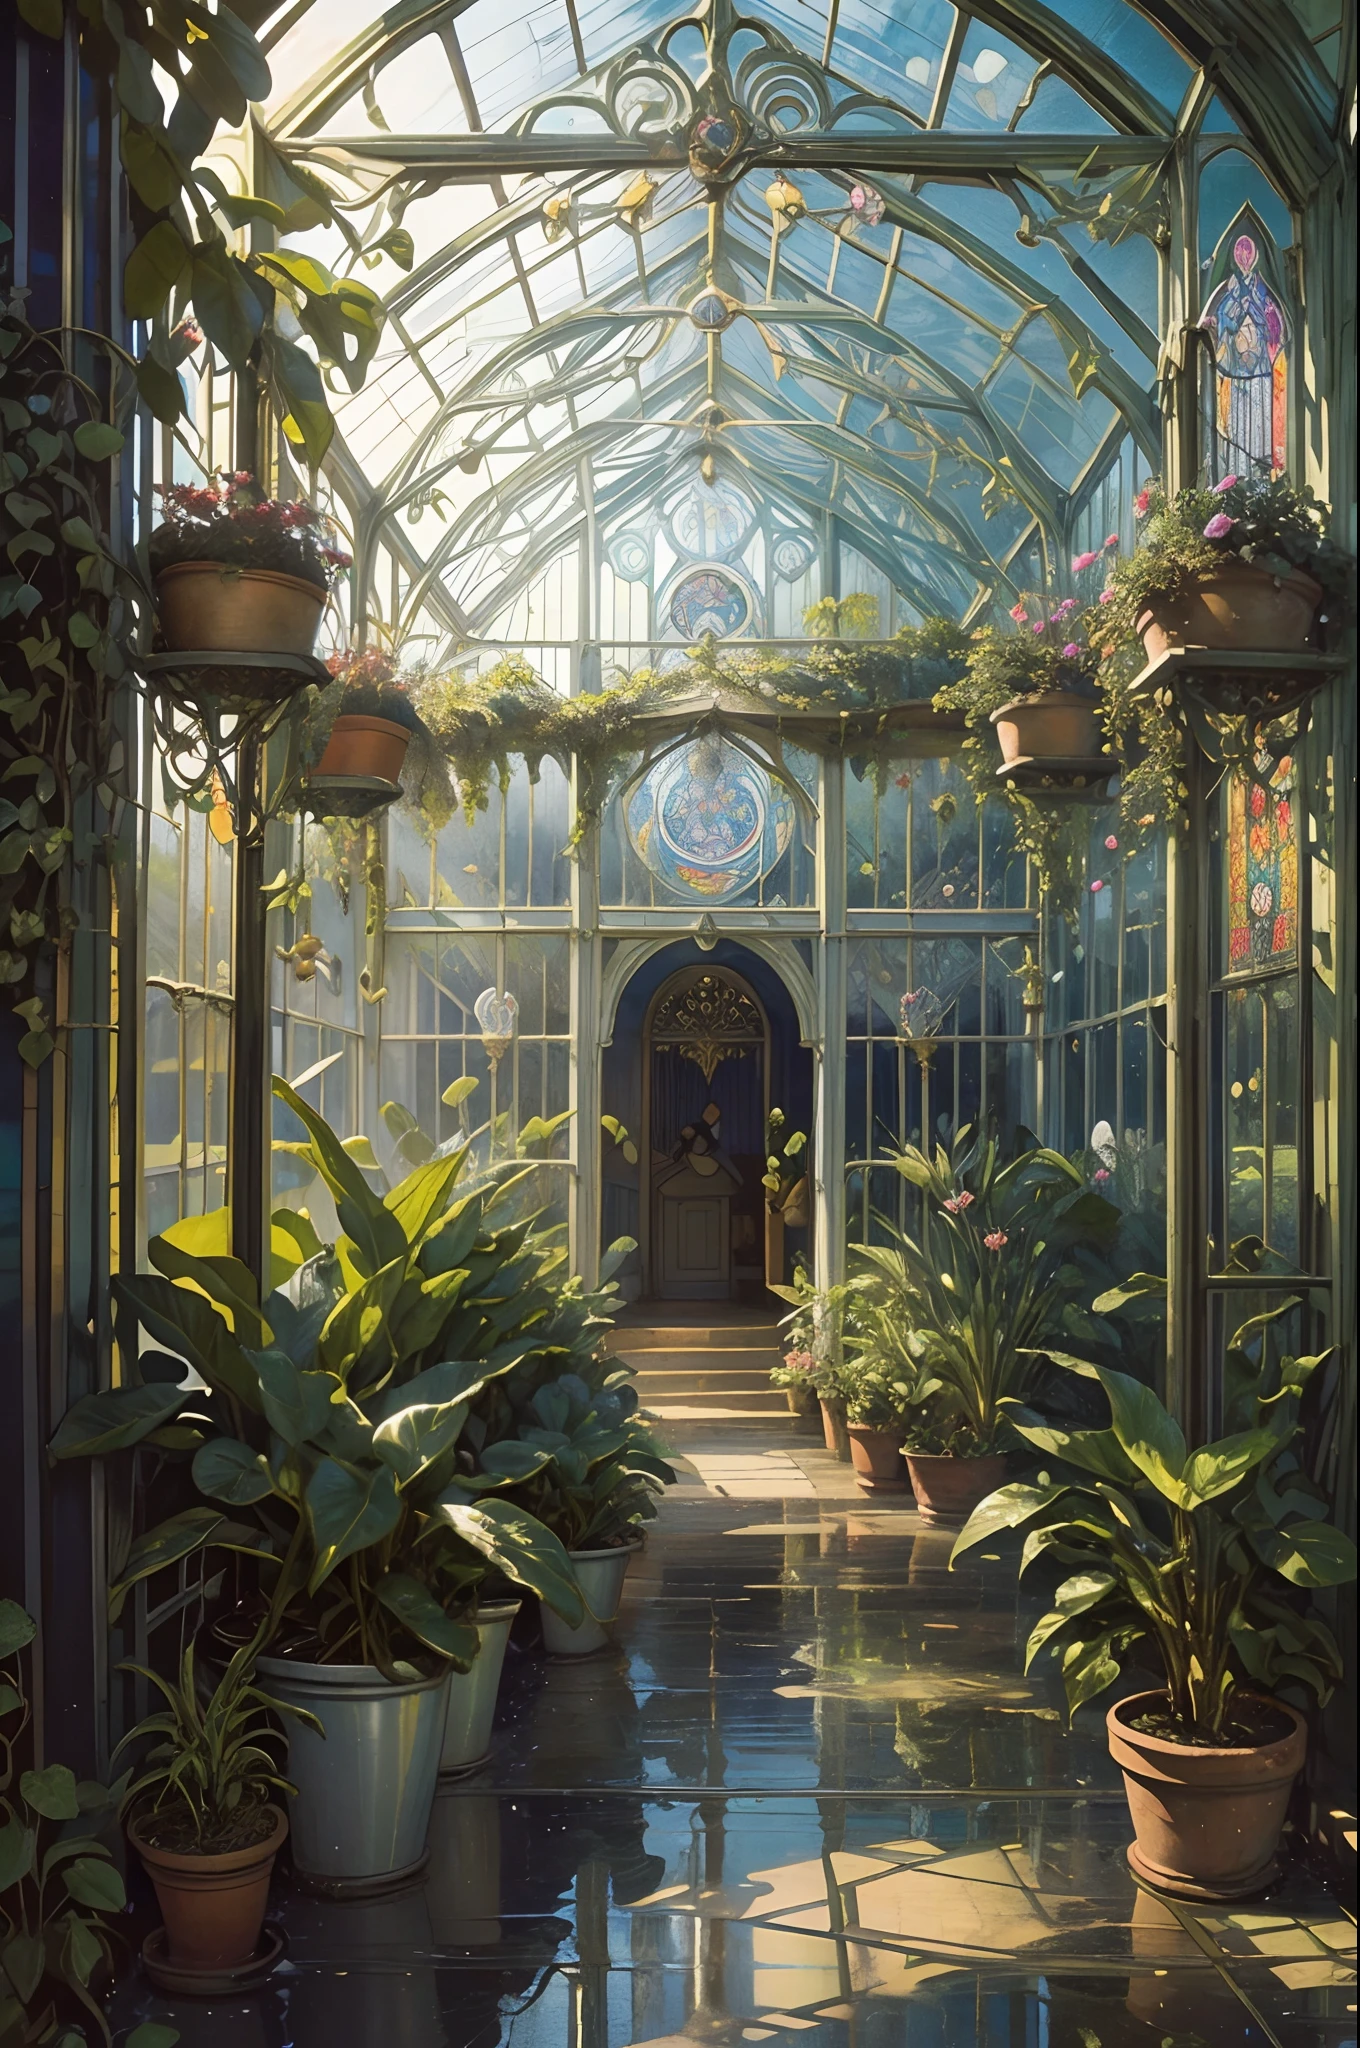 ((nobody)) Vintage Victorian style, Precise old encyclopedia (best quality:1.2), (detailed:1.2), (masterpiece:1.2), ((vintage illustrations of a big greenhouse with many plants, walls are made of stained glass, raindrops, sunlight, iridescent light))